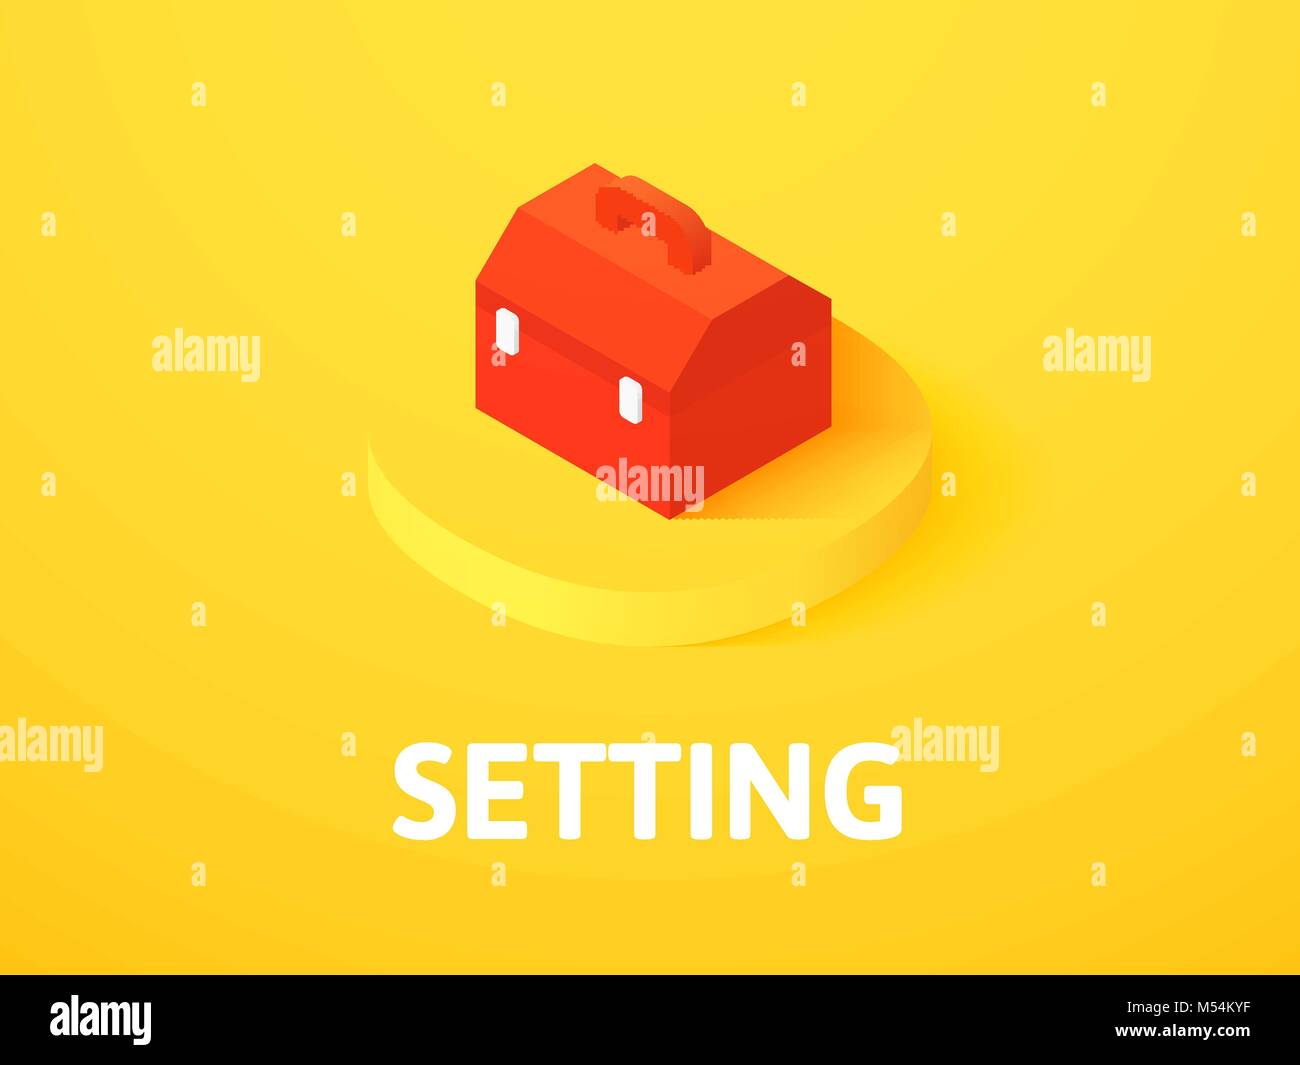 Setting isometric icon, isolated on color background Stock Vector